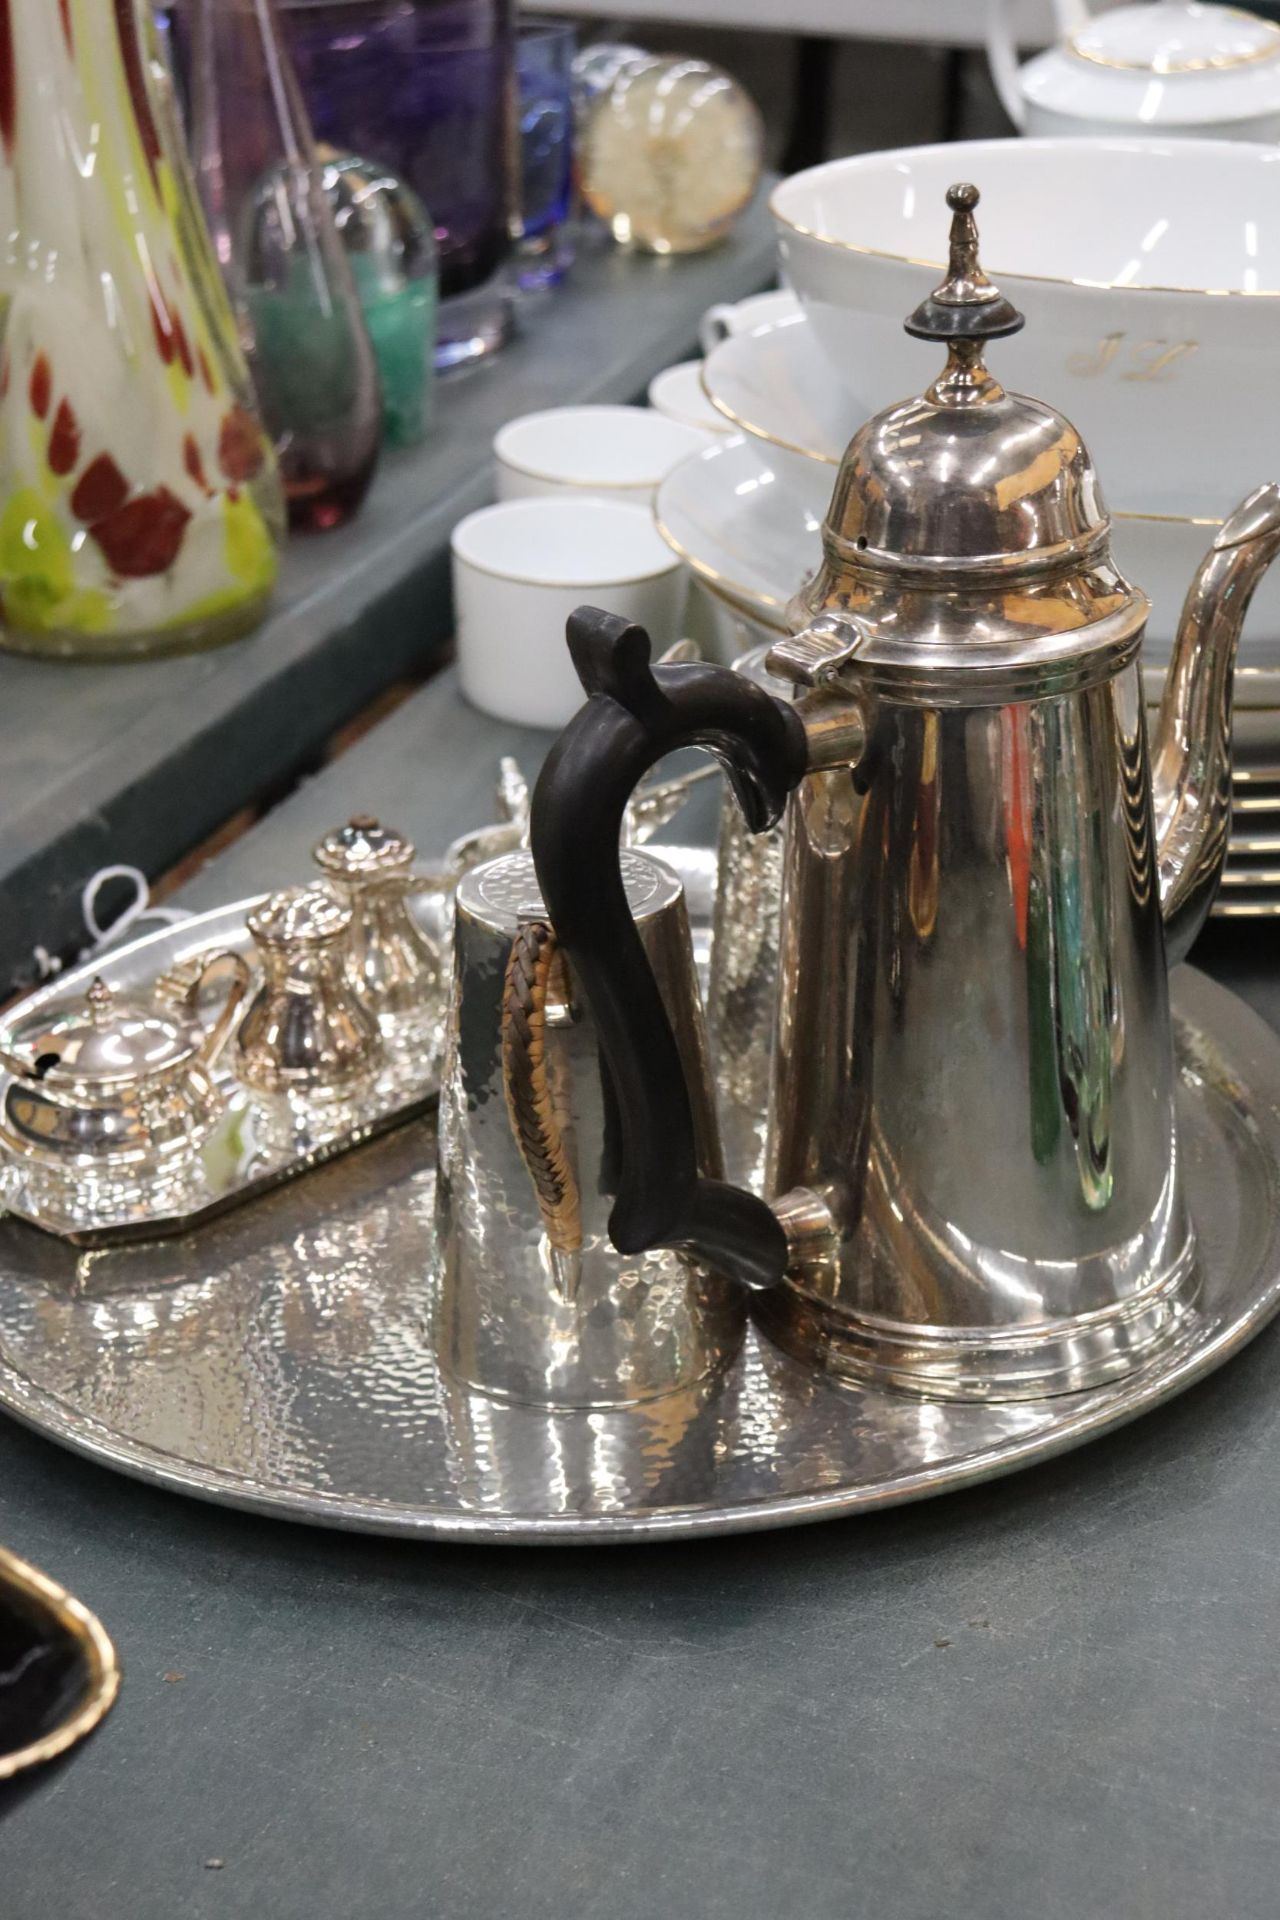 A PEWTER TRAY, COFFEE POT AND HOT WATER JUG, PLUS A SILVER PLATED COFFEE POT, CRUET SET, MUSTARD - Image 9 of 9